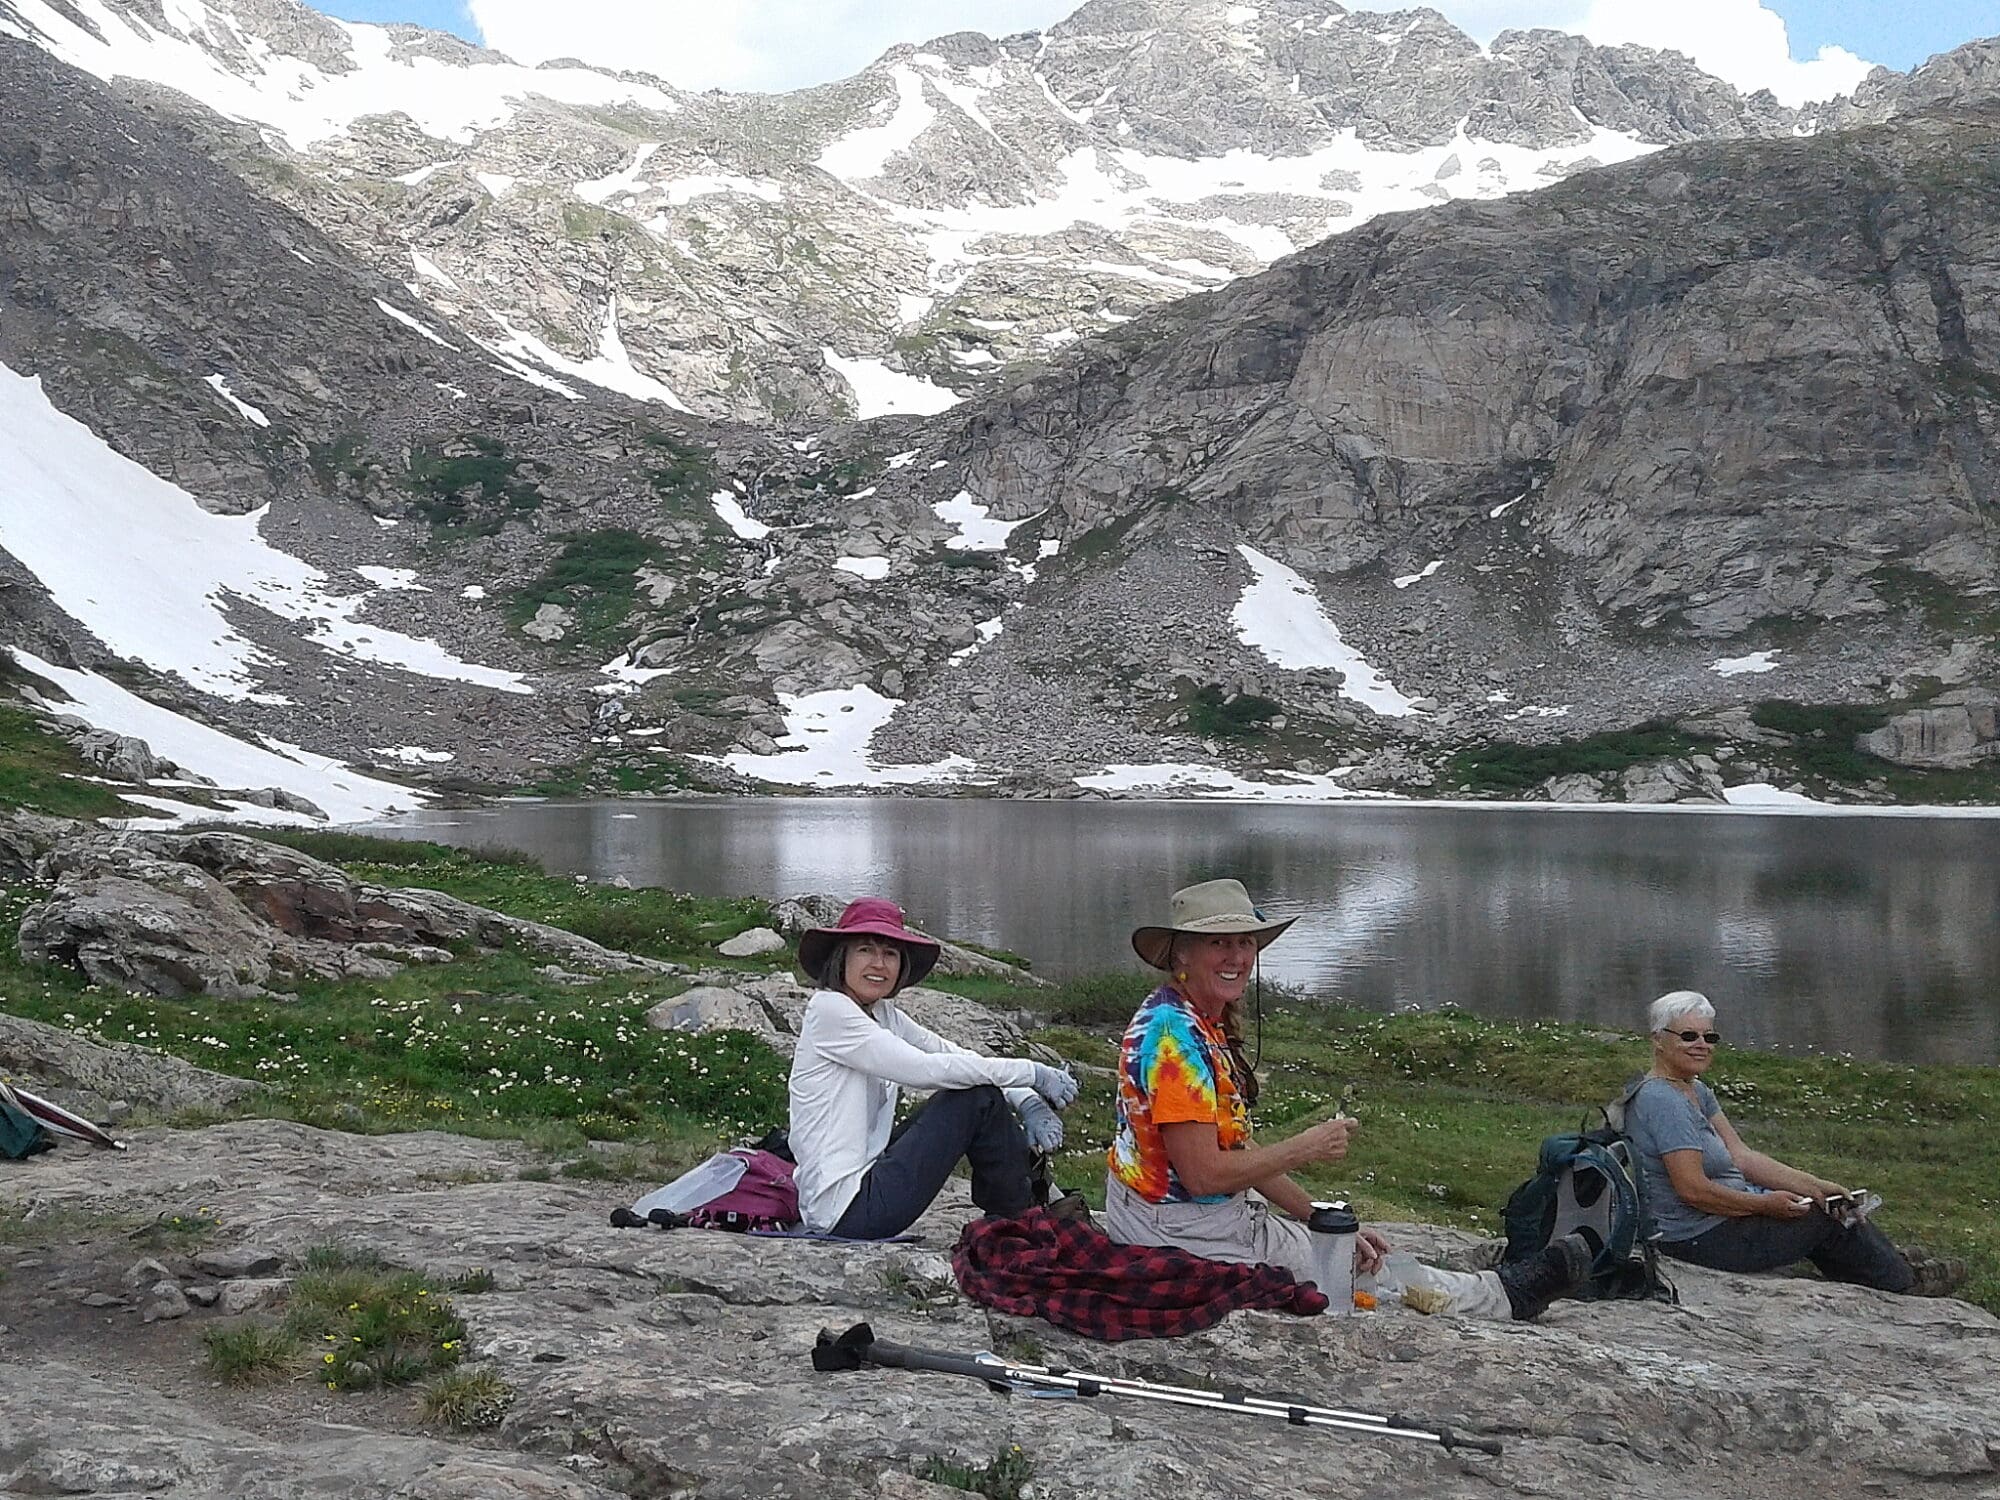 Garna Clubs - Hiking Club - Women sitting alongside high alpine lake with spots of snow on the mountainside